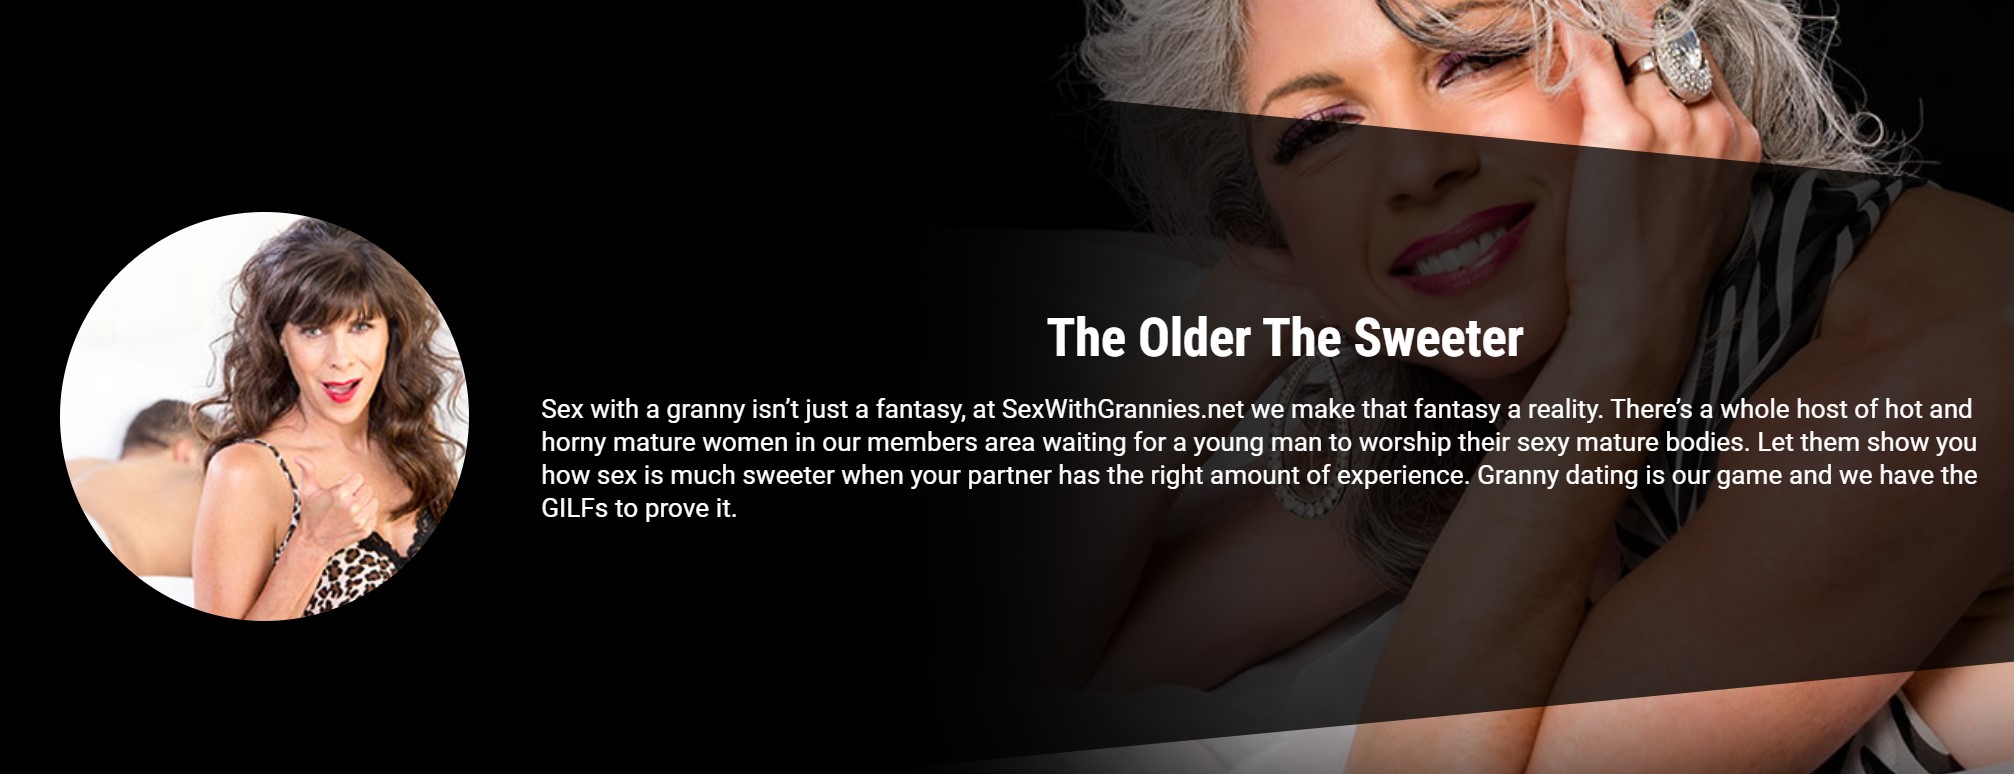 SexWithGrannies.net Review